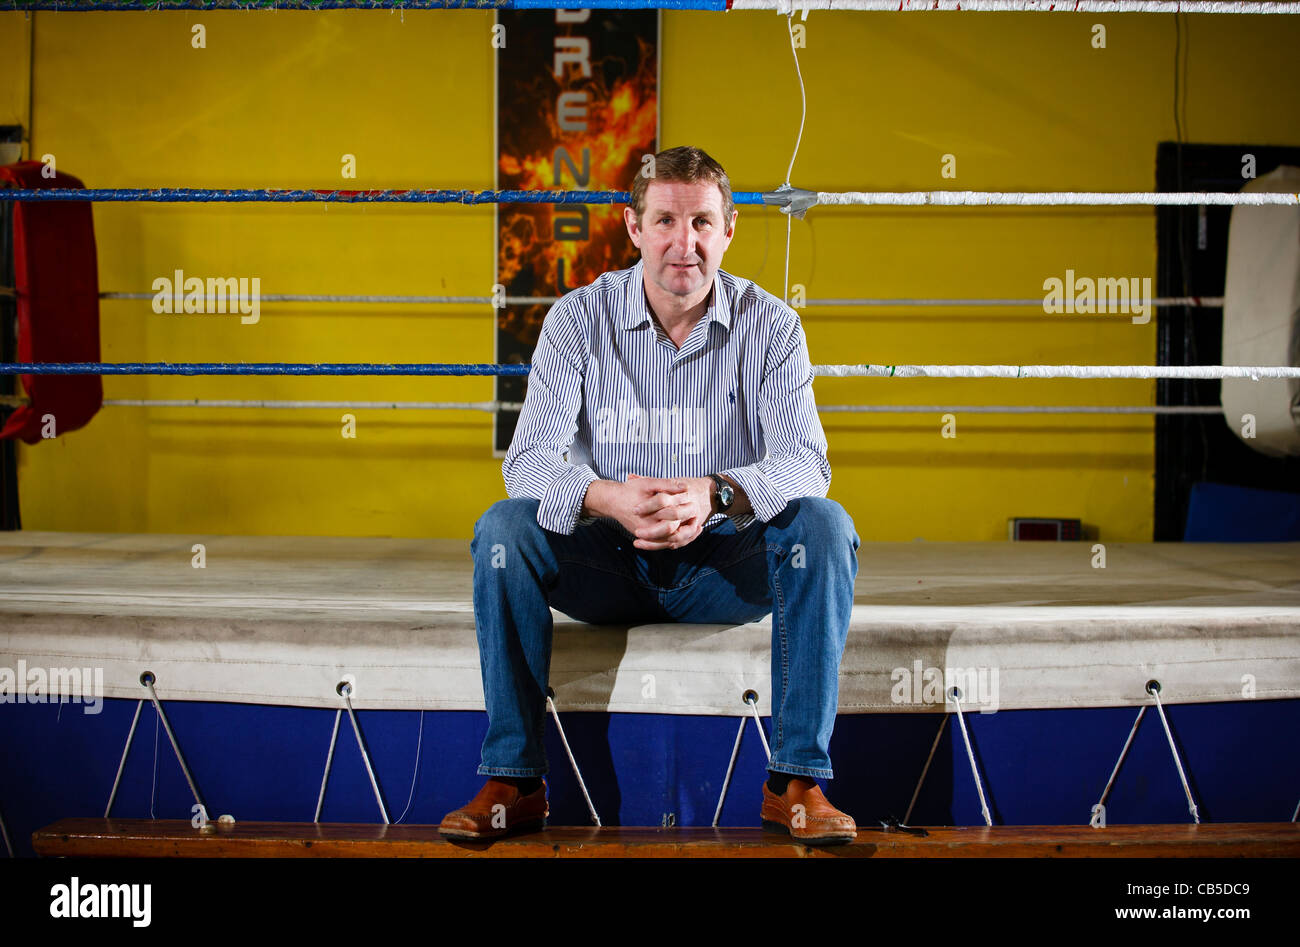 Boxing promoter sat on the side of a boxing ring Stock Photo